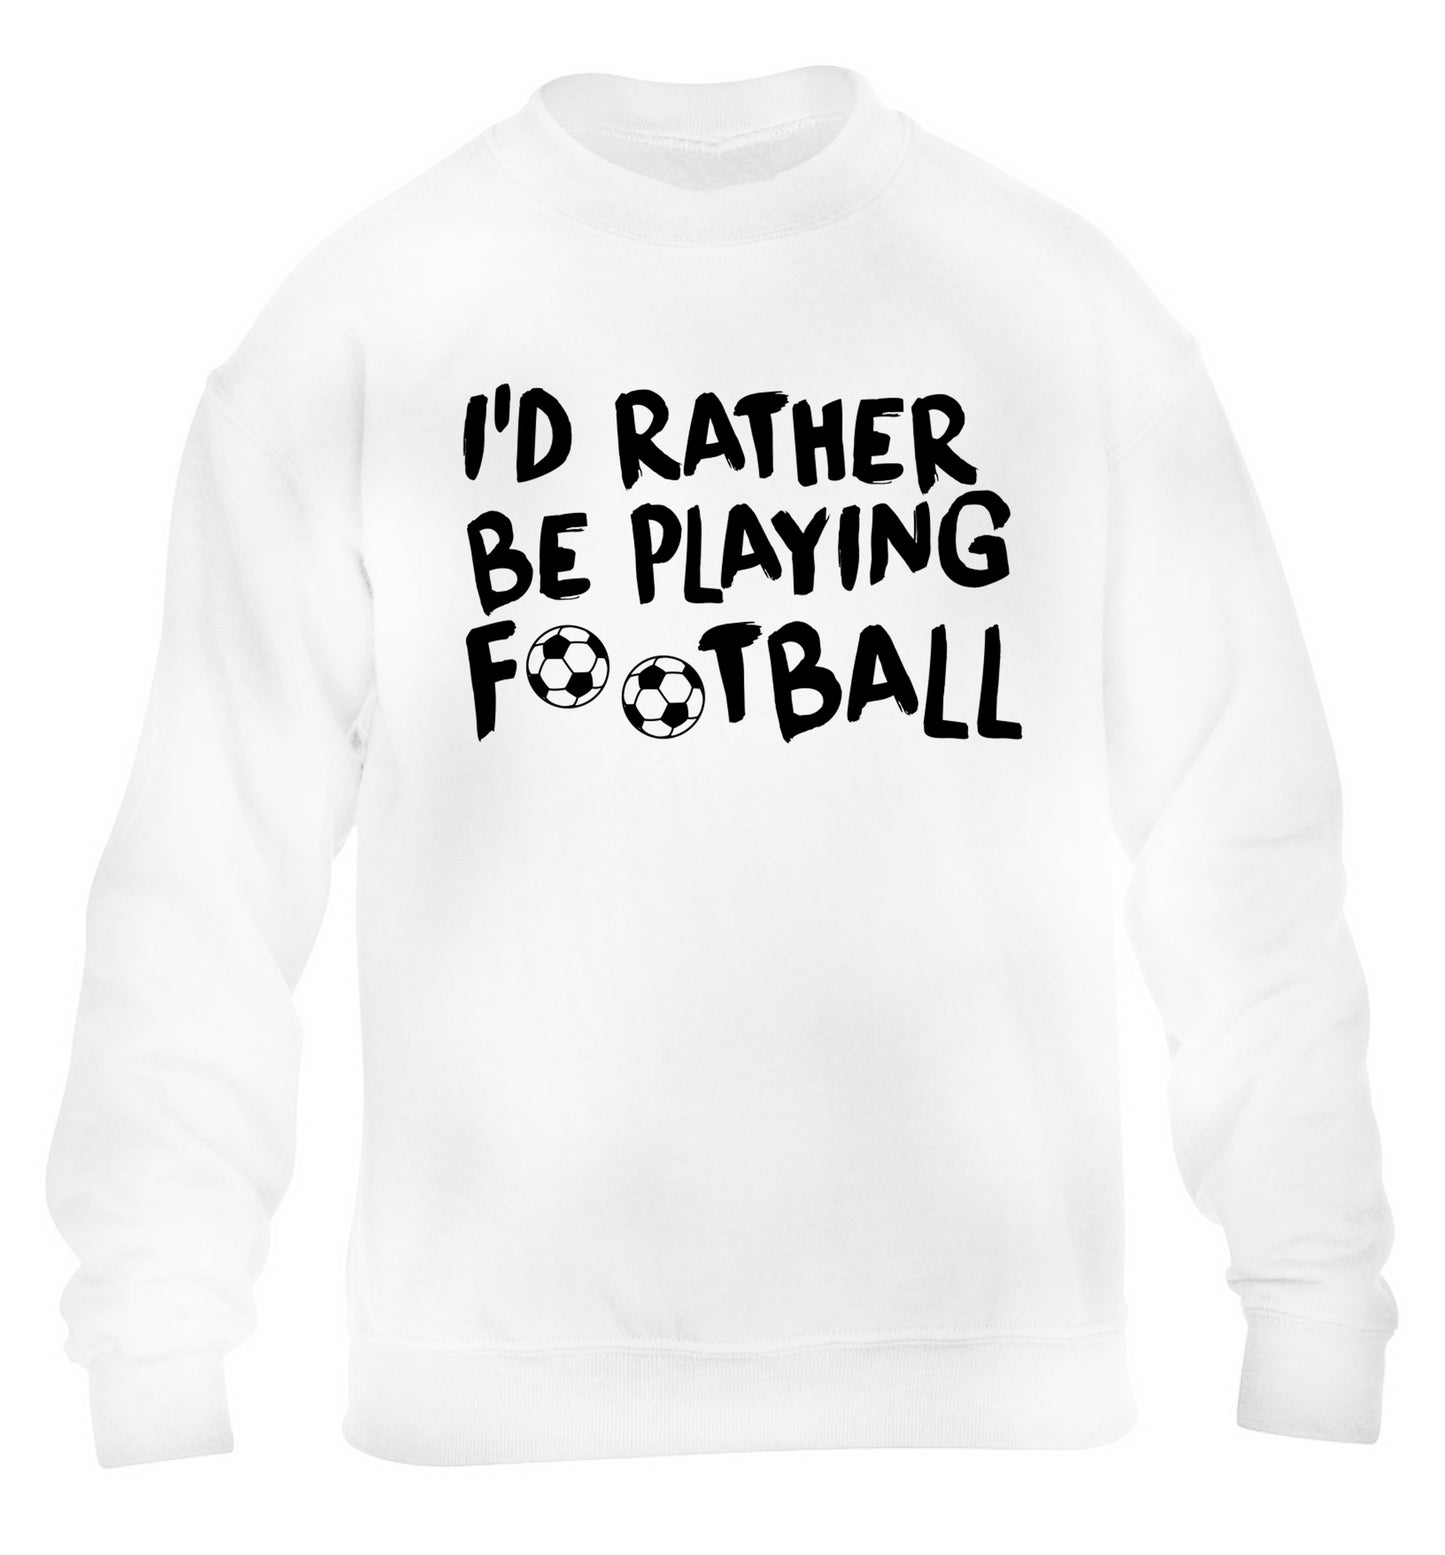 I'd rather be playing football children's white sweater 12-14 Years